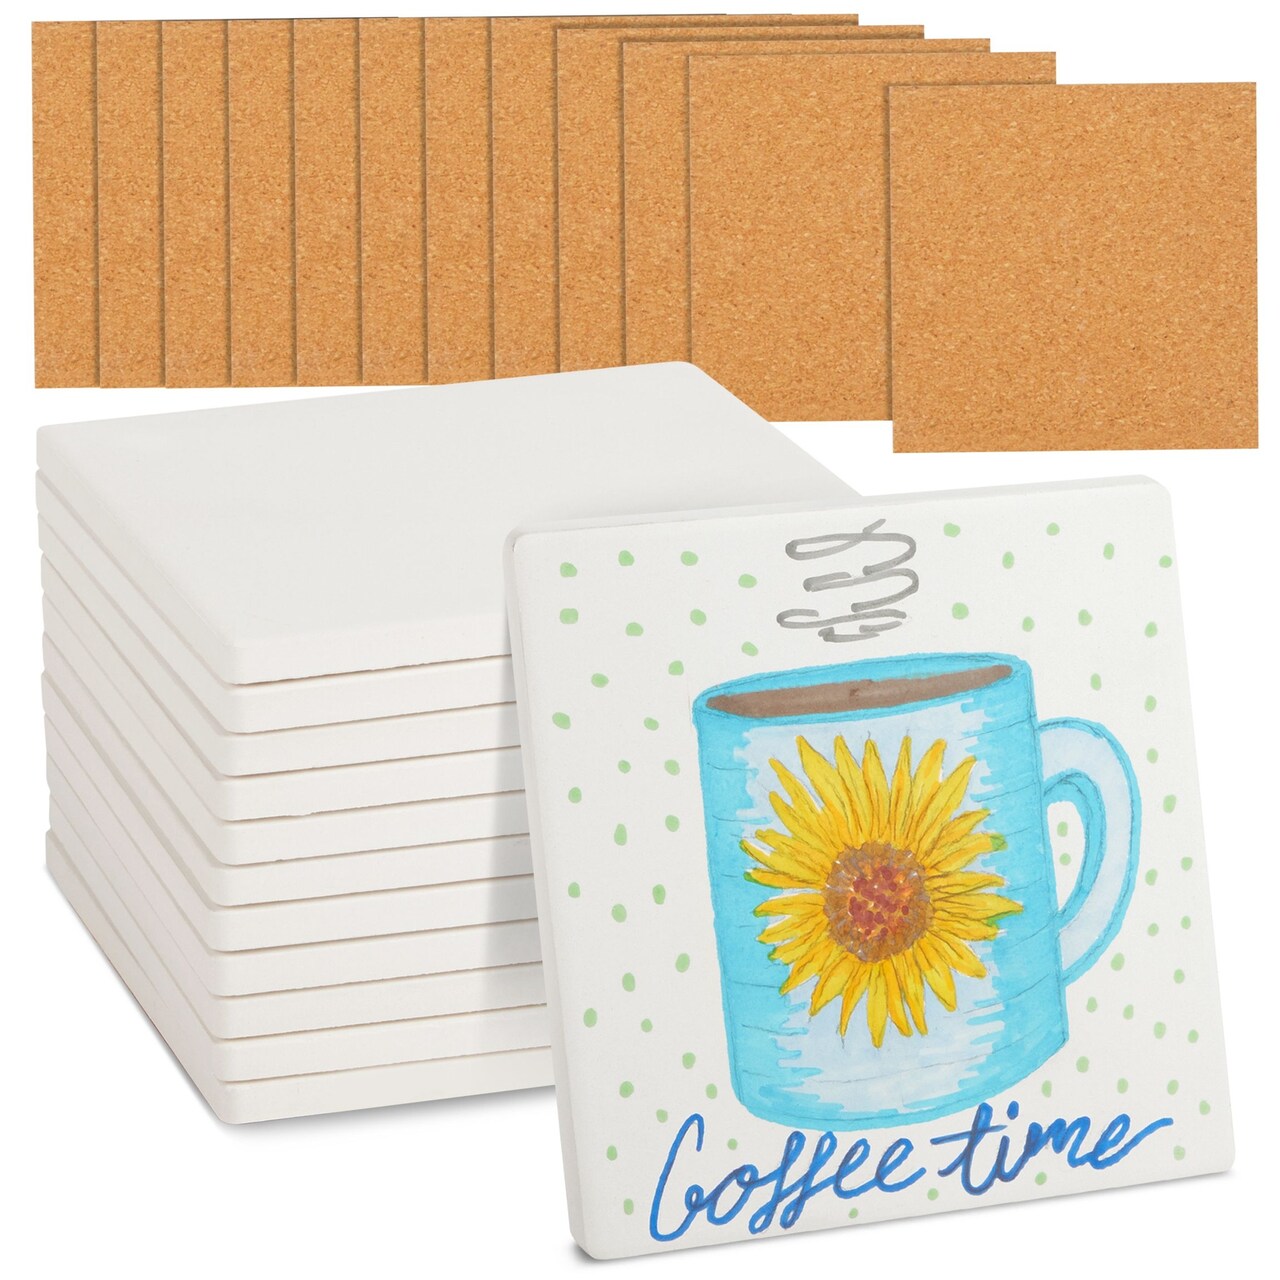 4 Inch Square Ceramic Tiles for Crafts with Cork Backing Pads, 12 Pack of  Unglazed White DIY Coasters for Painting